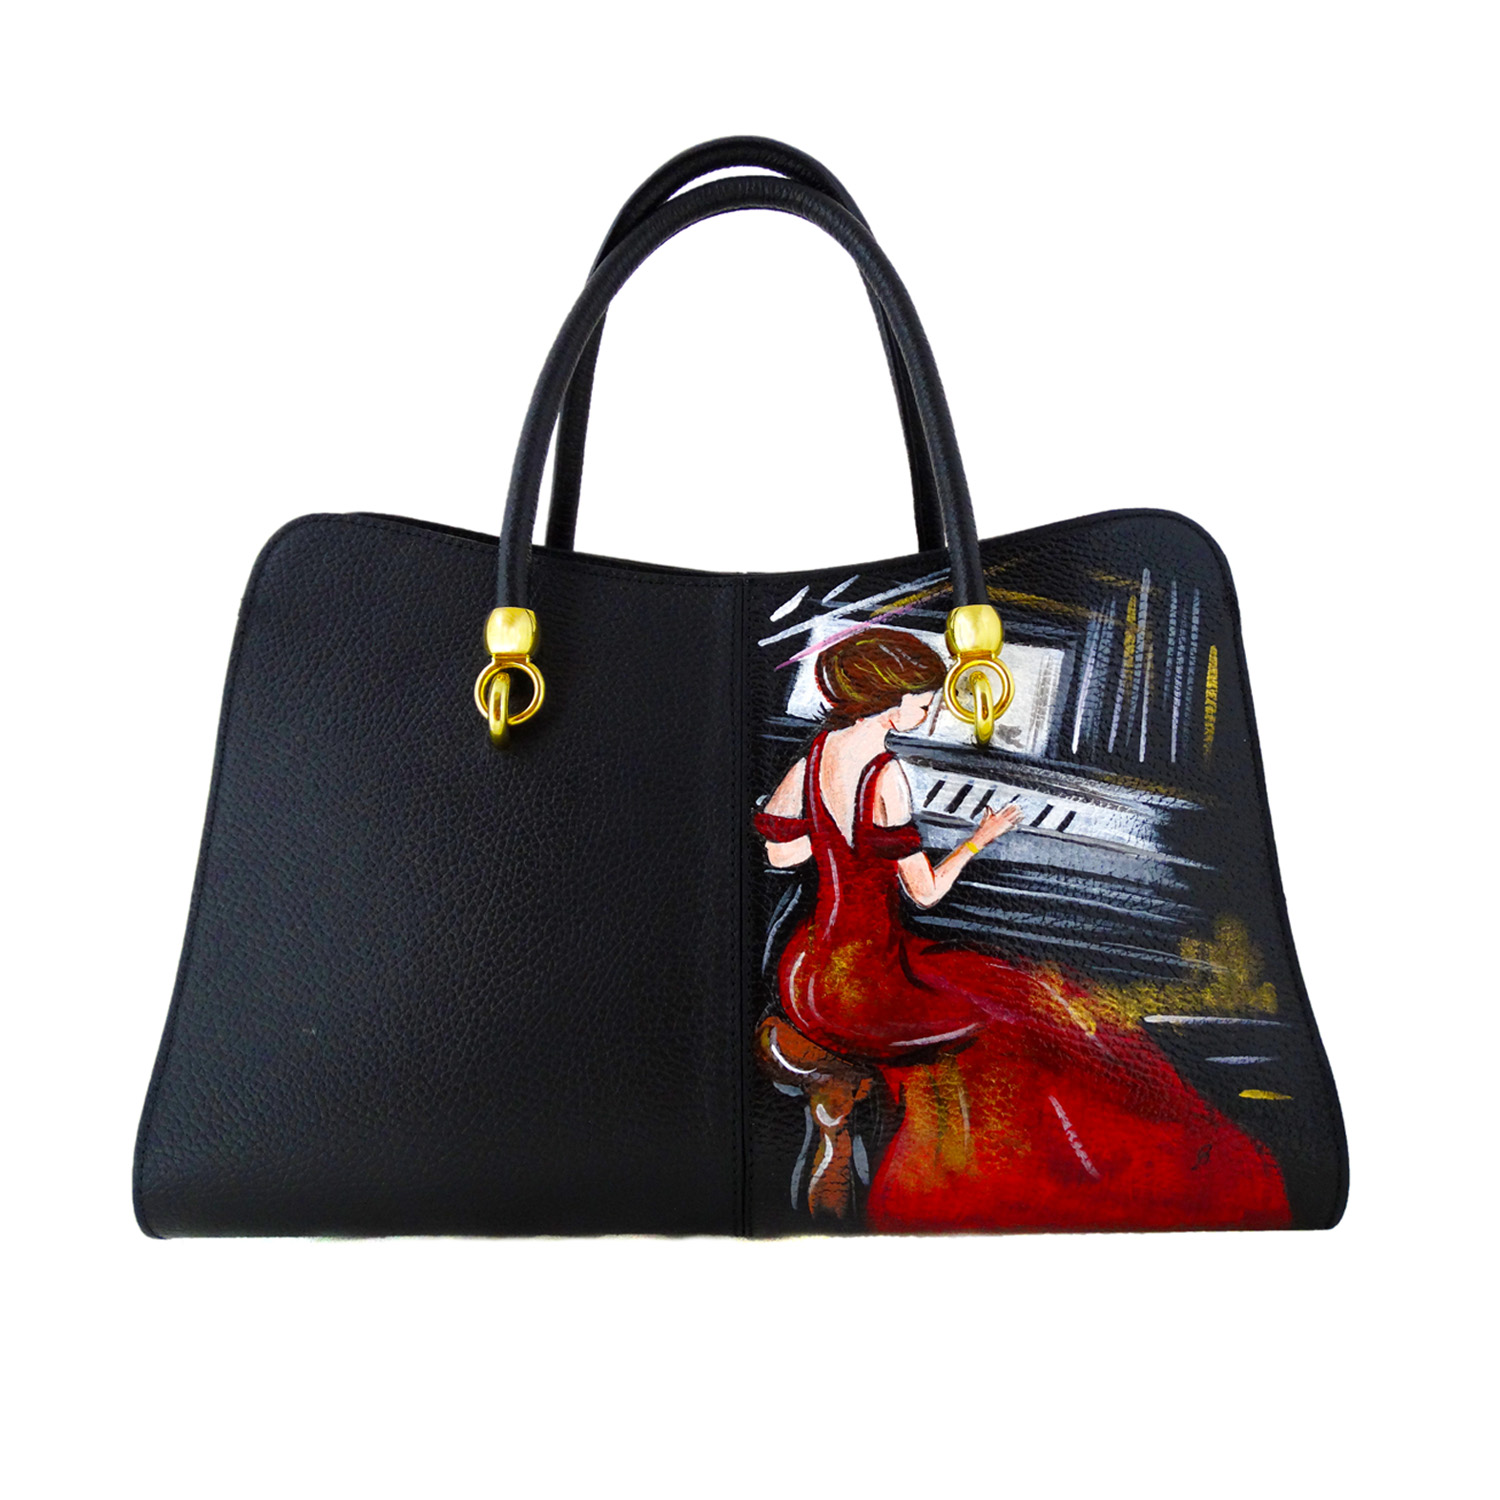 Hand-painted bag - Woman in Red by Boldini